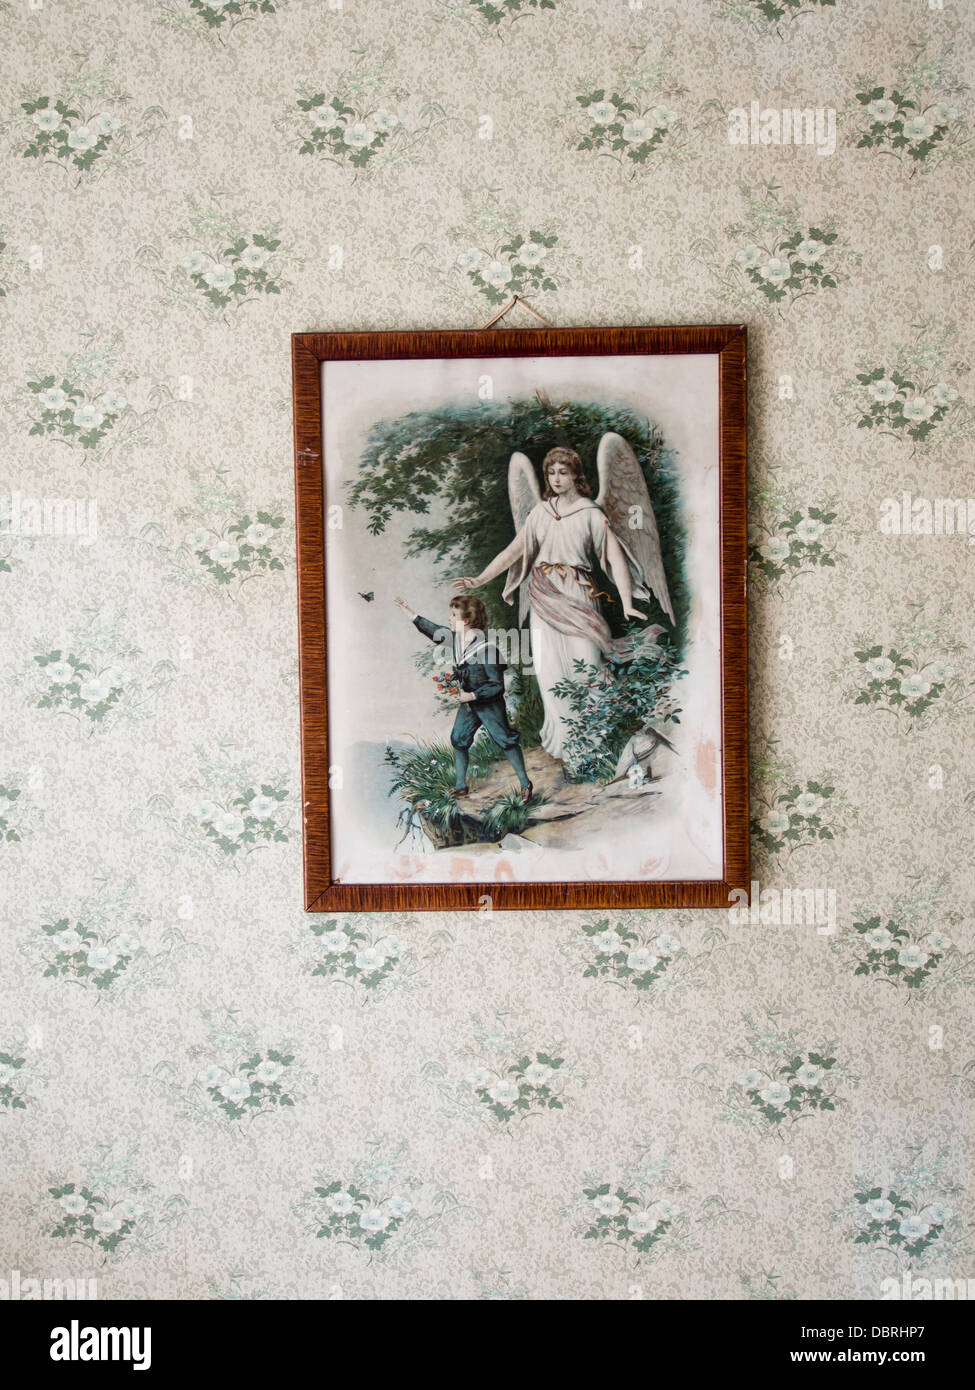 Religious print, brown frame, flower patterned wallpaper, angel protecting young boy on edge of cliff,  vintage decoration Stock Photo